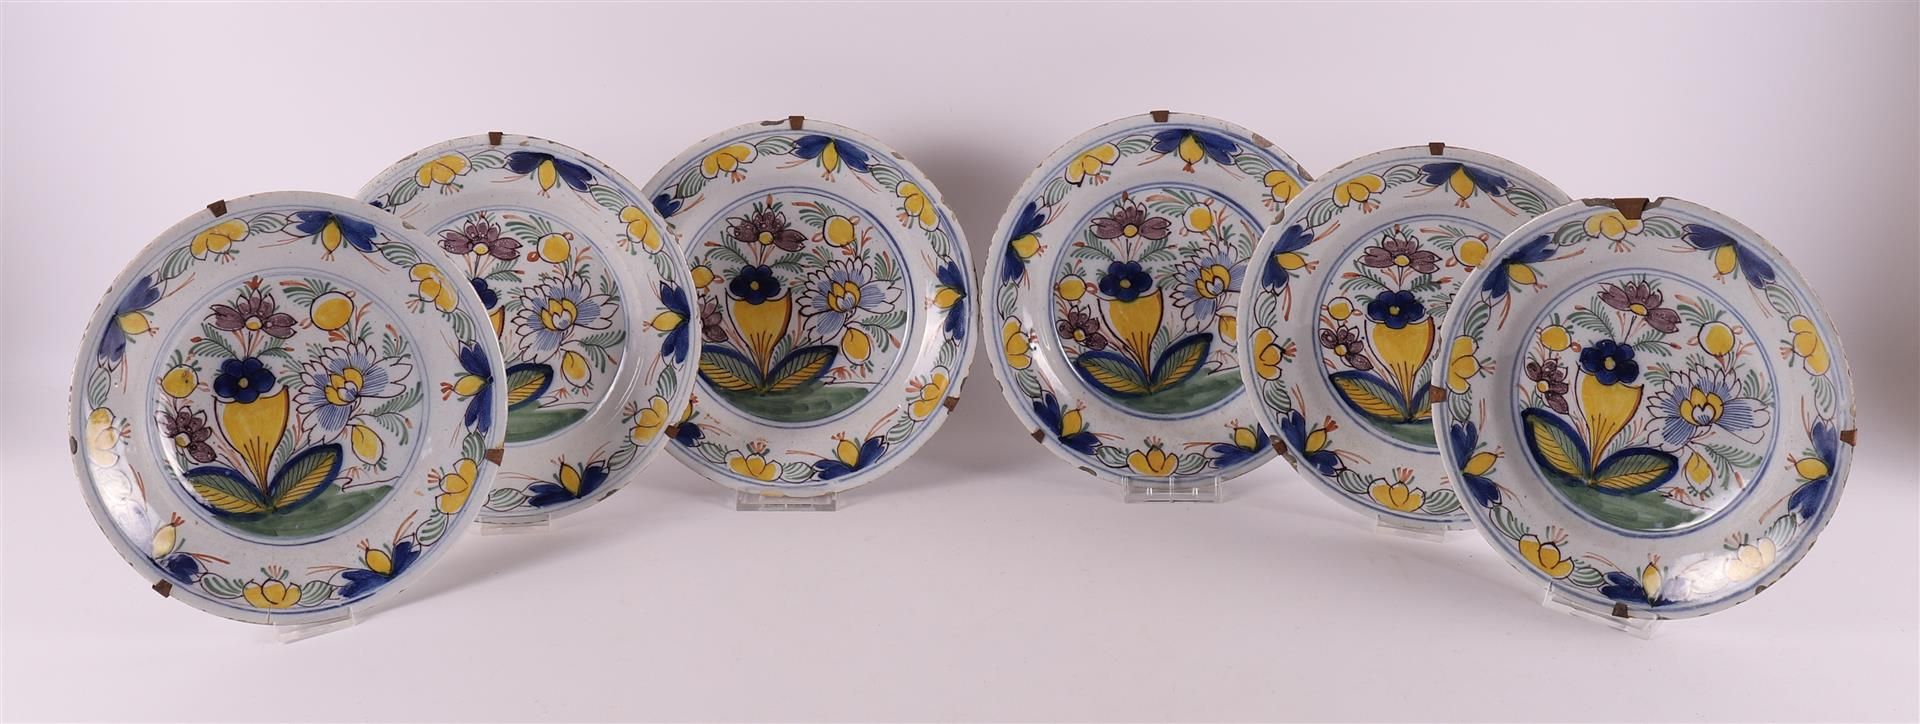 A series of six Delft earthenware plates, 18th century.